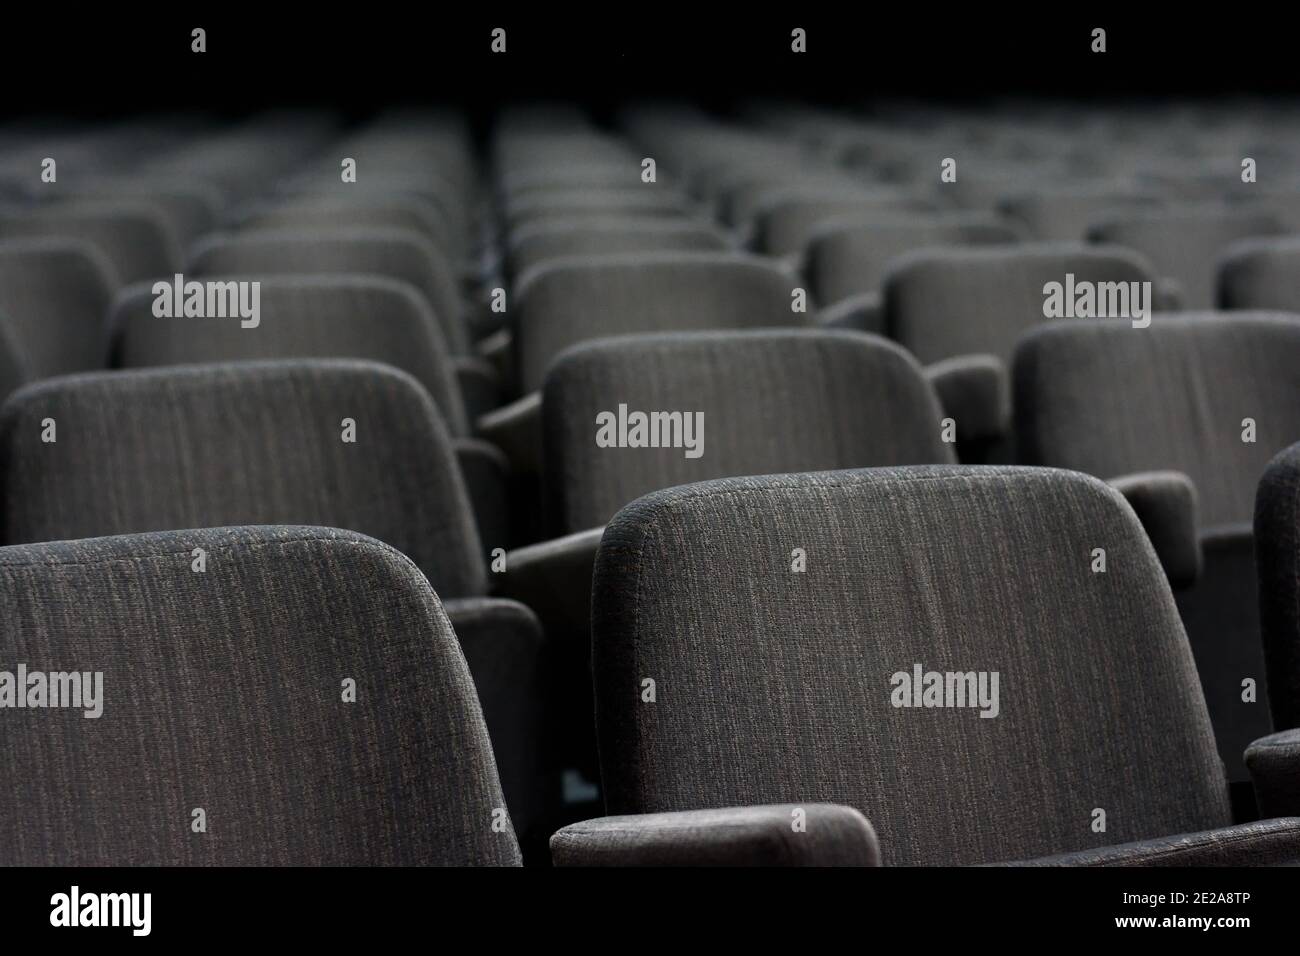 Empty rows of theater or movie seats. Stock Photo